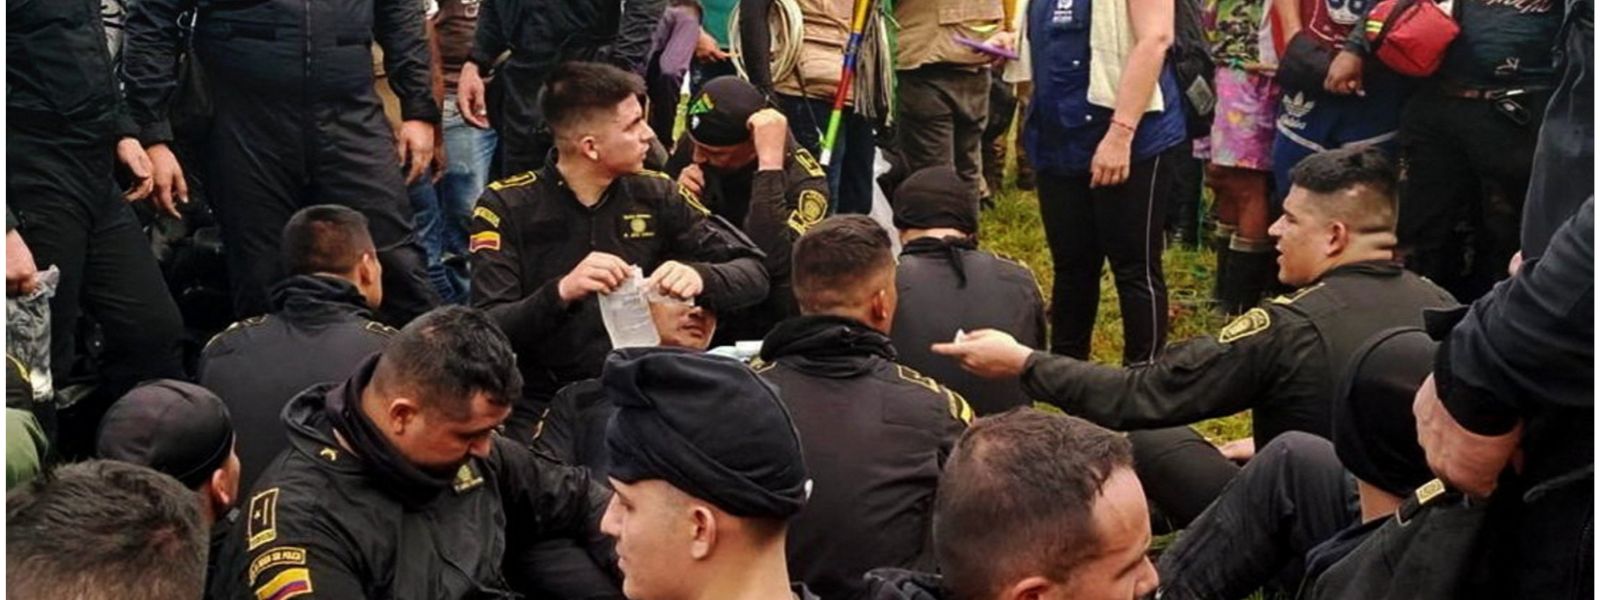 Seventy-nine Colombian police officers taken hostage by area residents demanding help to build roads for their town, freed peacefully